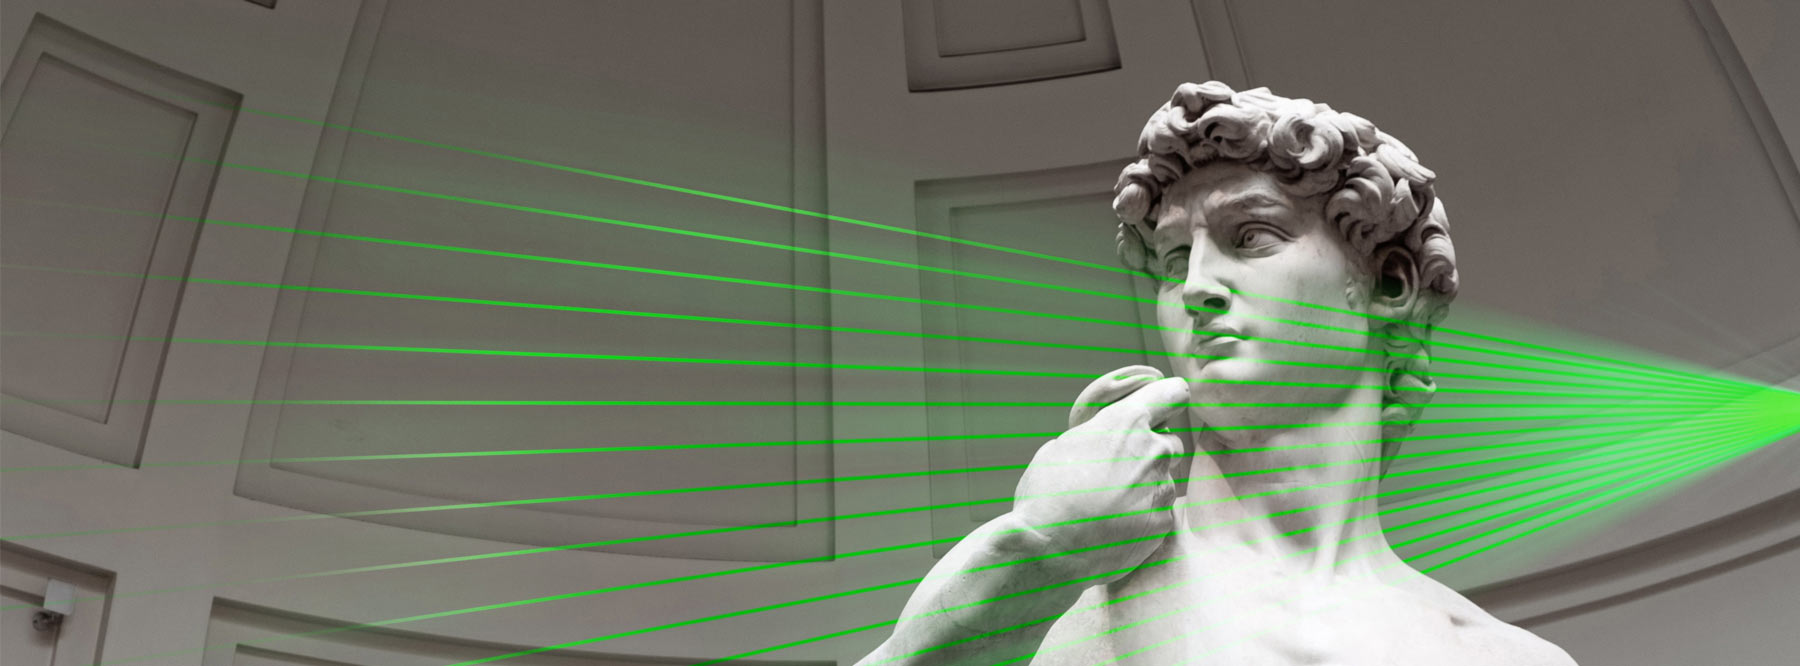 Imaging of a statue